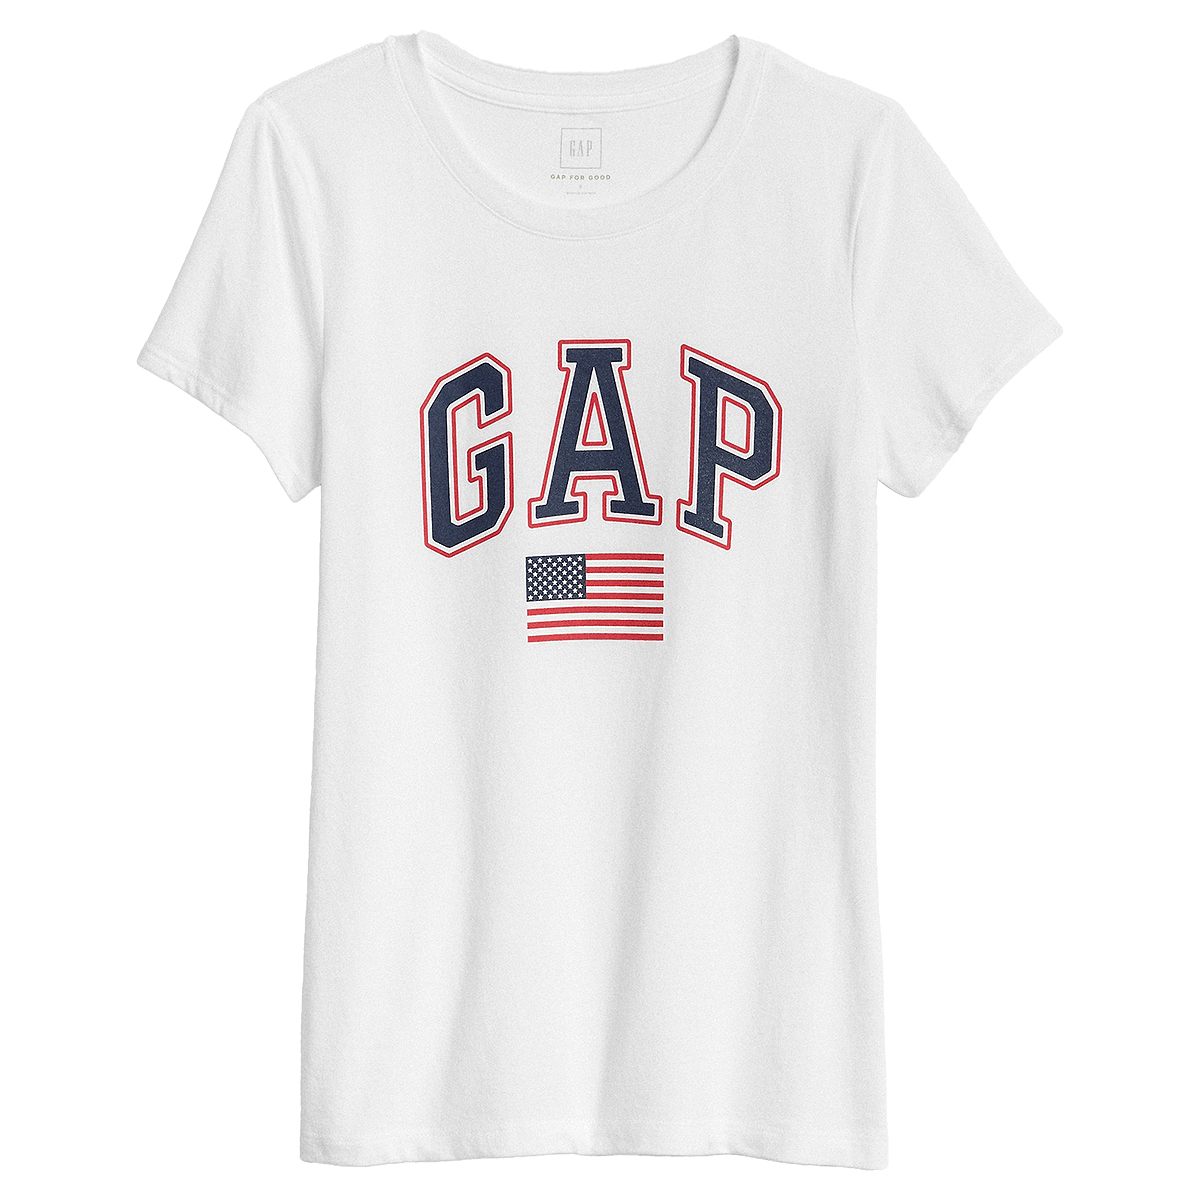 Gap Solid Color Regular Fit Crew Neck Short Sleeve T-Shirt with Screen Printed Logo & American Flag Graphic - White